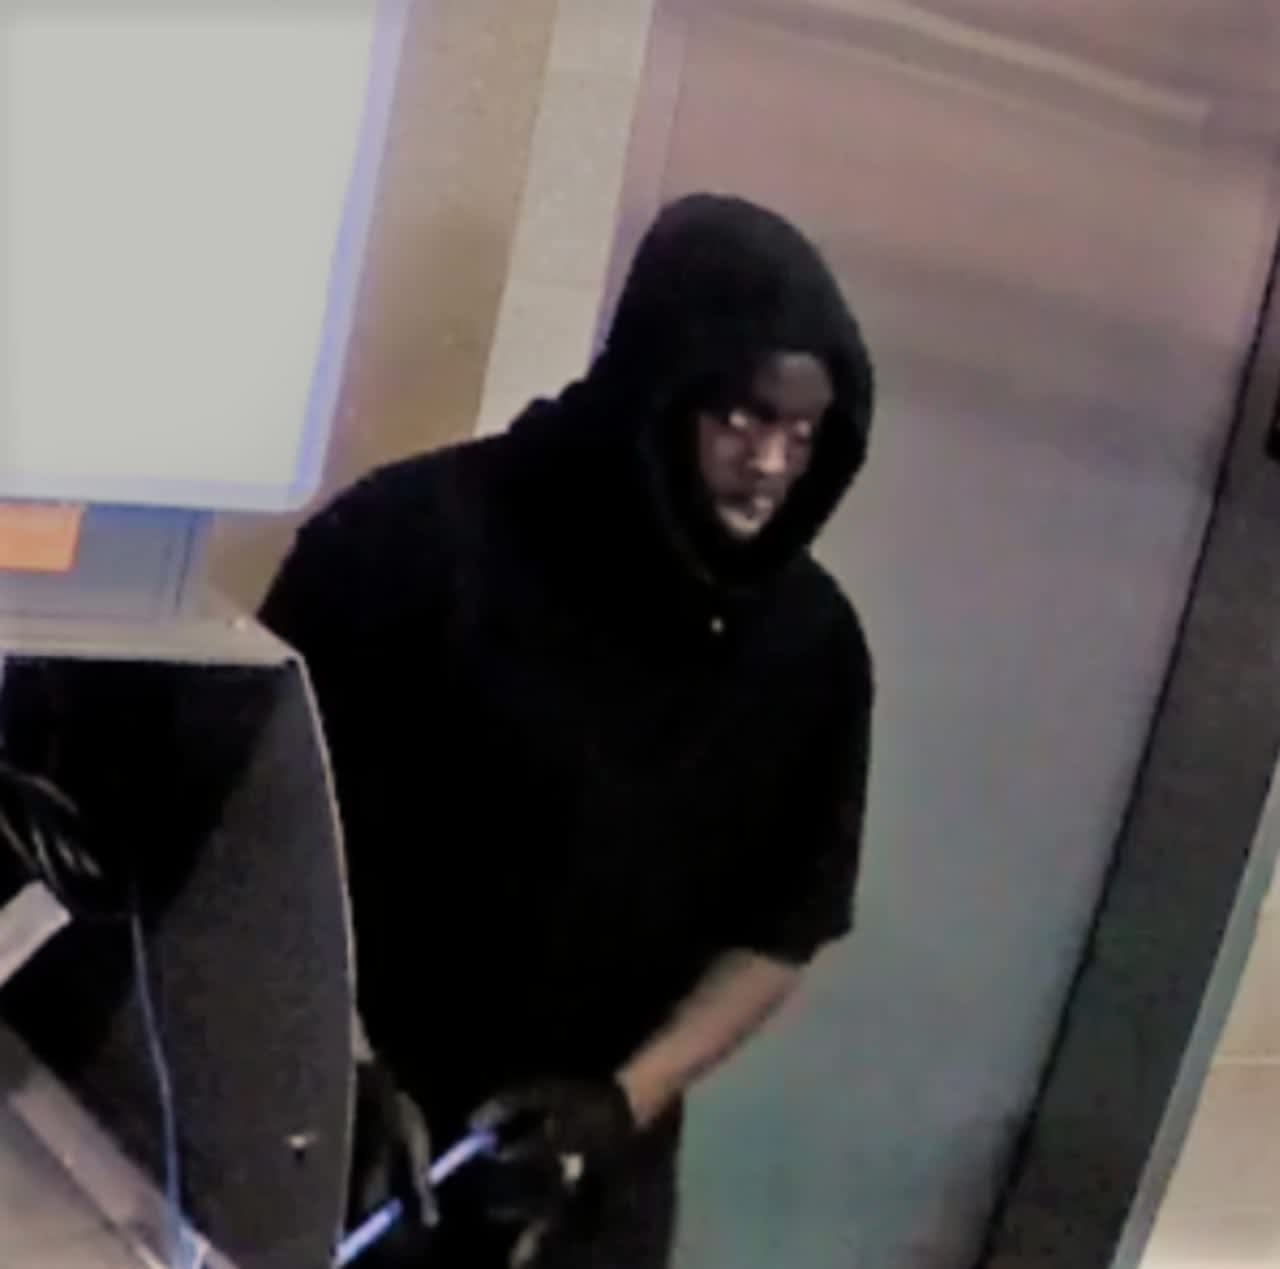 An African American suspect was caught on camera allegedly robbing parking machines and an ATM in Norwalk.